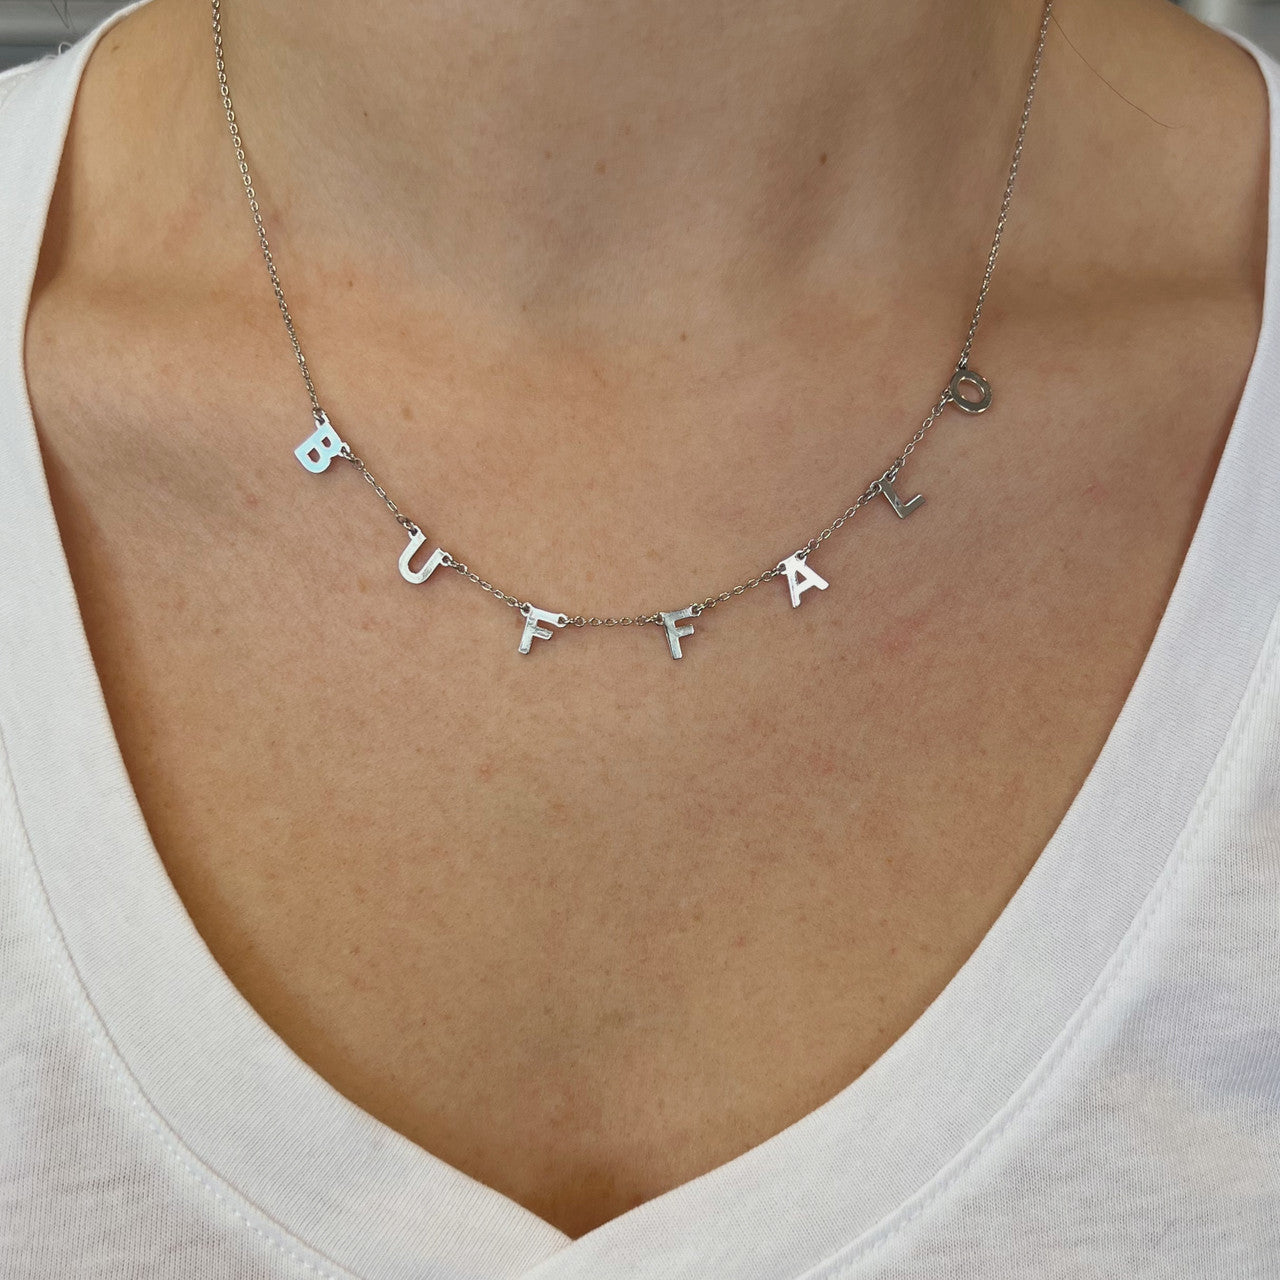 Buffalo Letter Necklace Silver